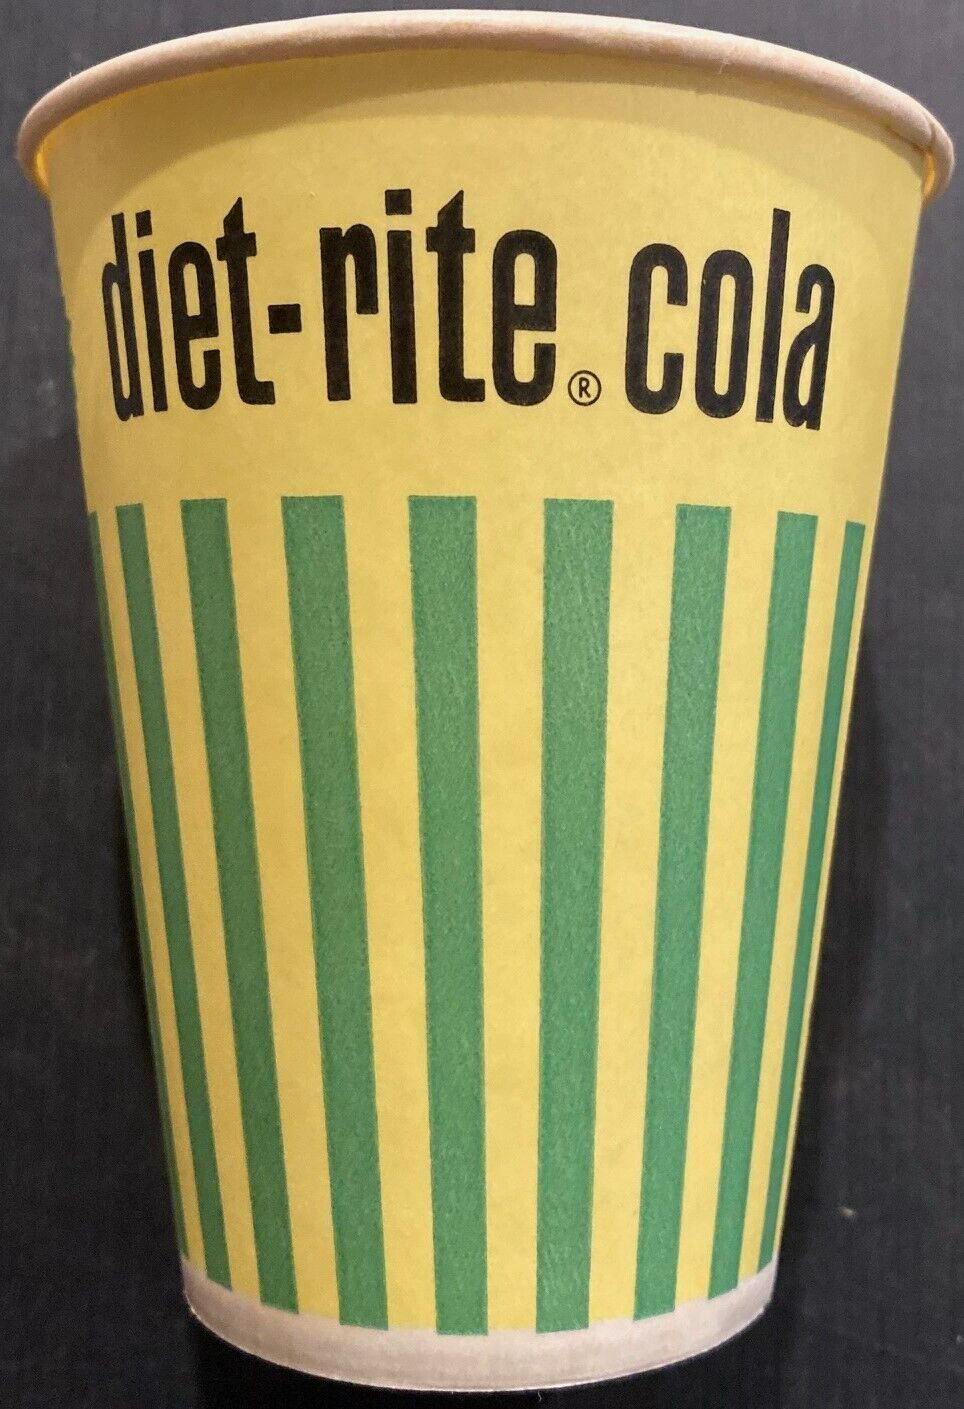 Vintage c-1960s Waxed Diet-Rite Cola Cups from an old plant. \